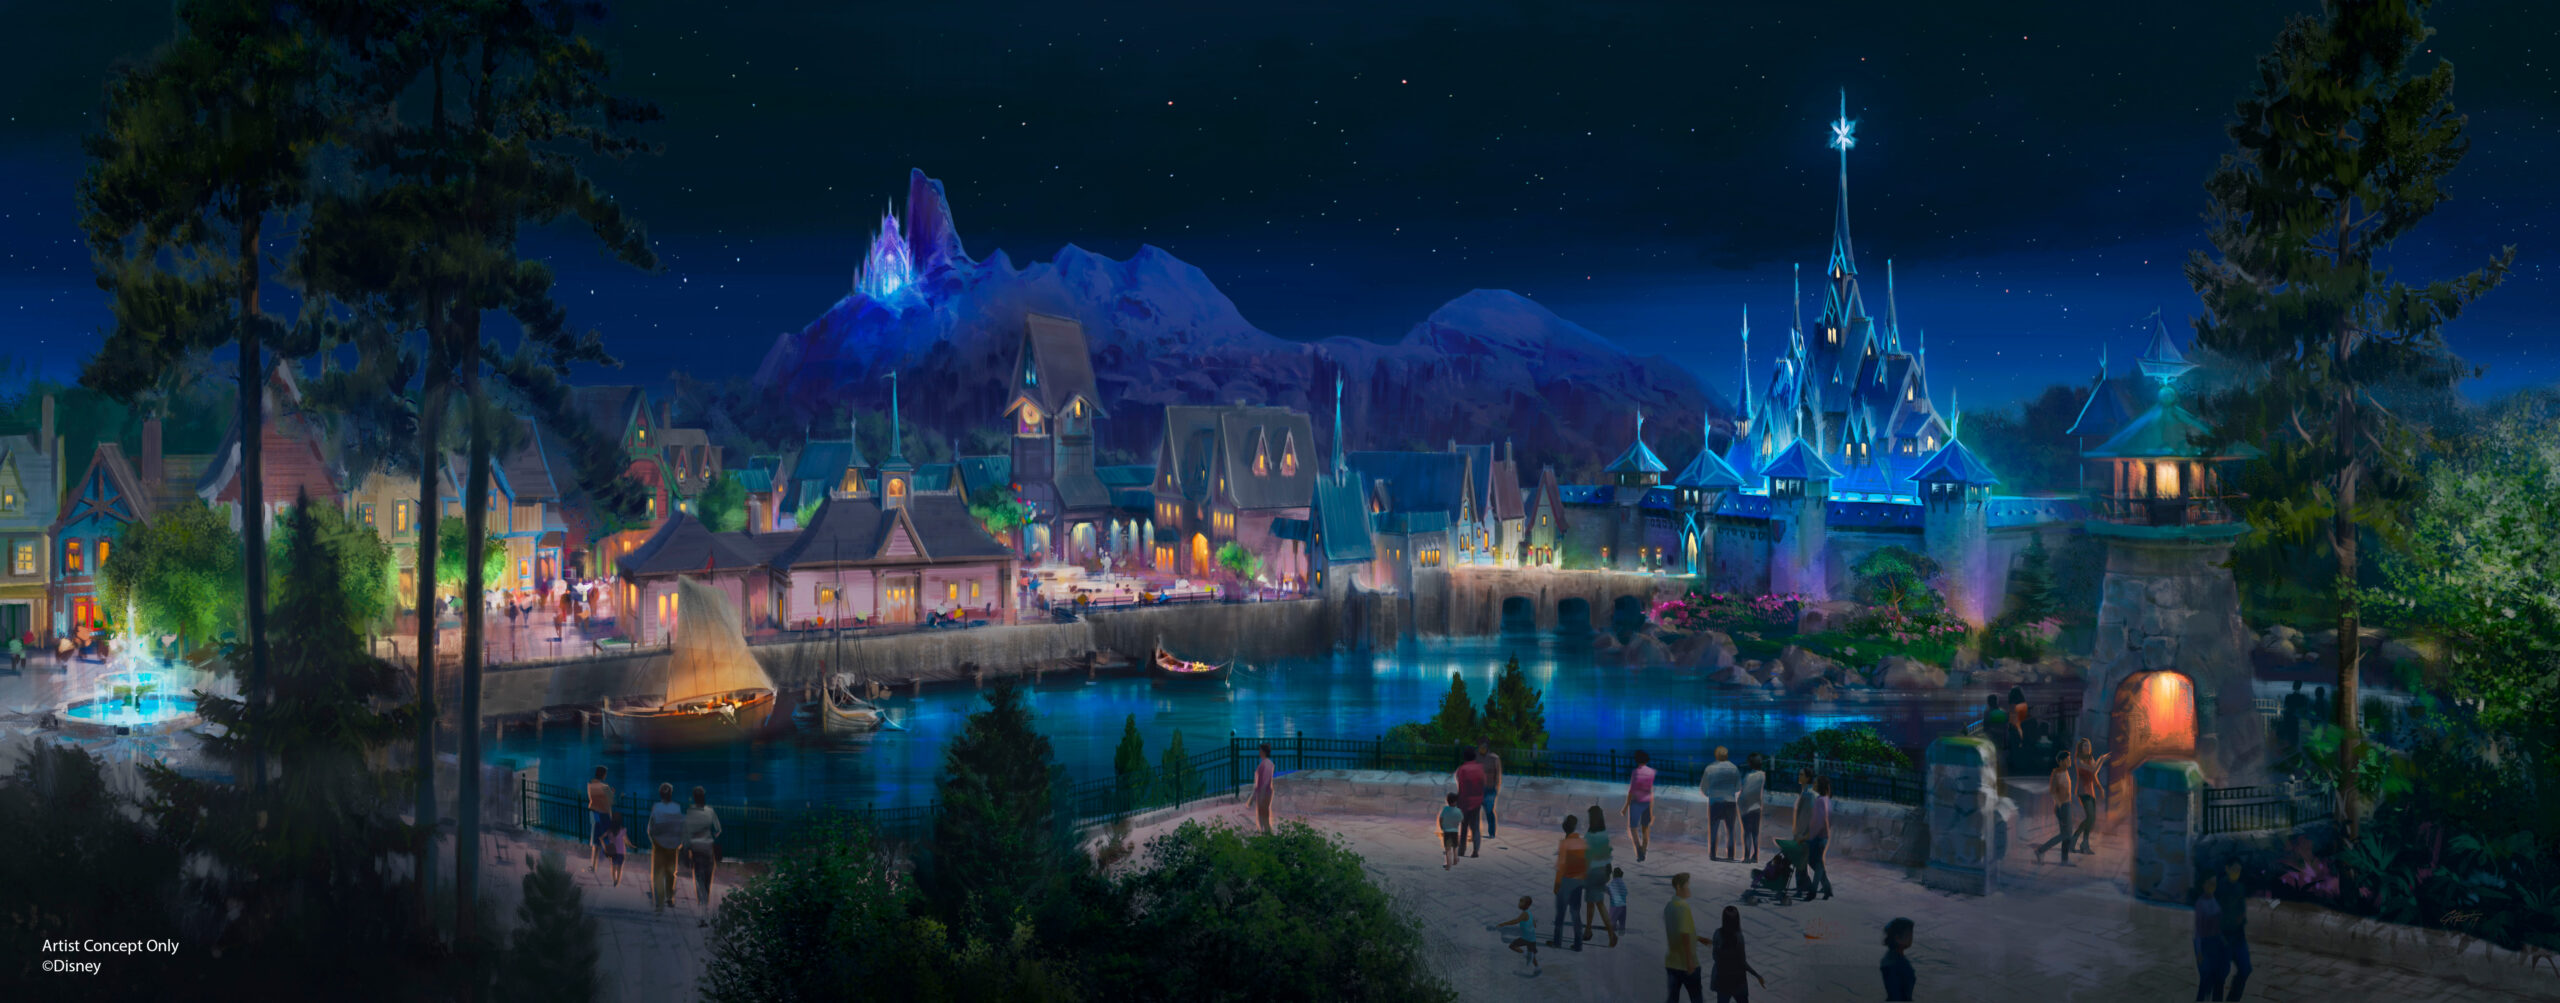 A special peek at what’s to come at Disneyland Paris is being shared! In Paris, Imagineers and teams are busy transforming Walt Disney Studios Park. The resort’s future “Frozen”-themed land that’ll highlight the kingdom of Anna and Elsa is taking shape and just a part of an exciting transformation. Keep checking the Disney Parks Blog for more details.